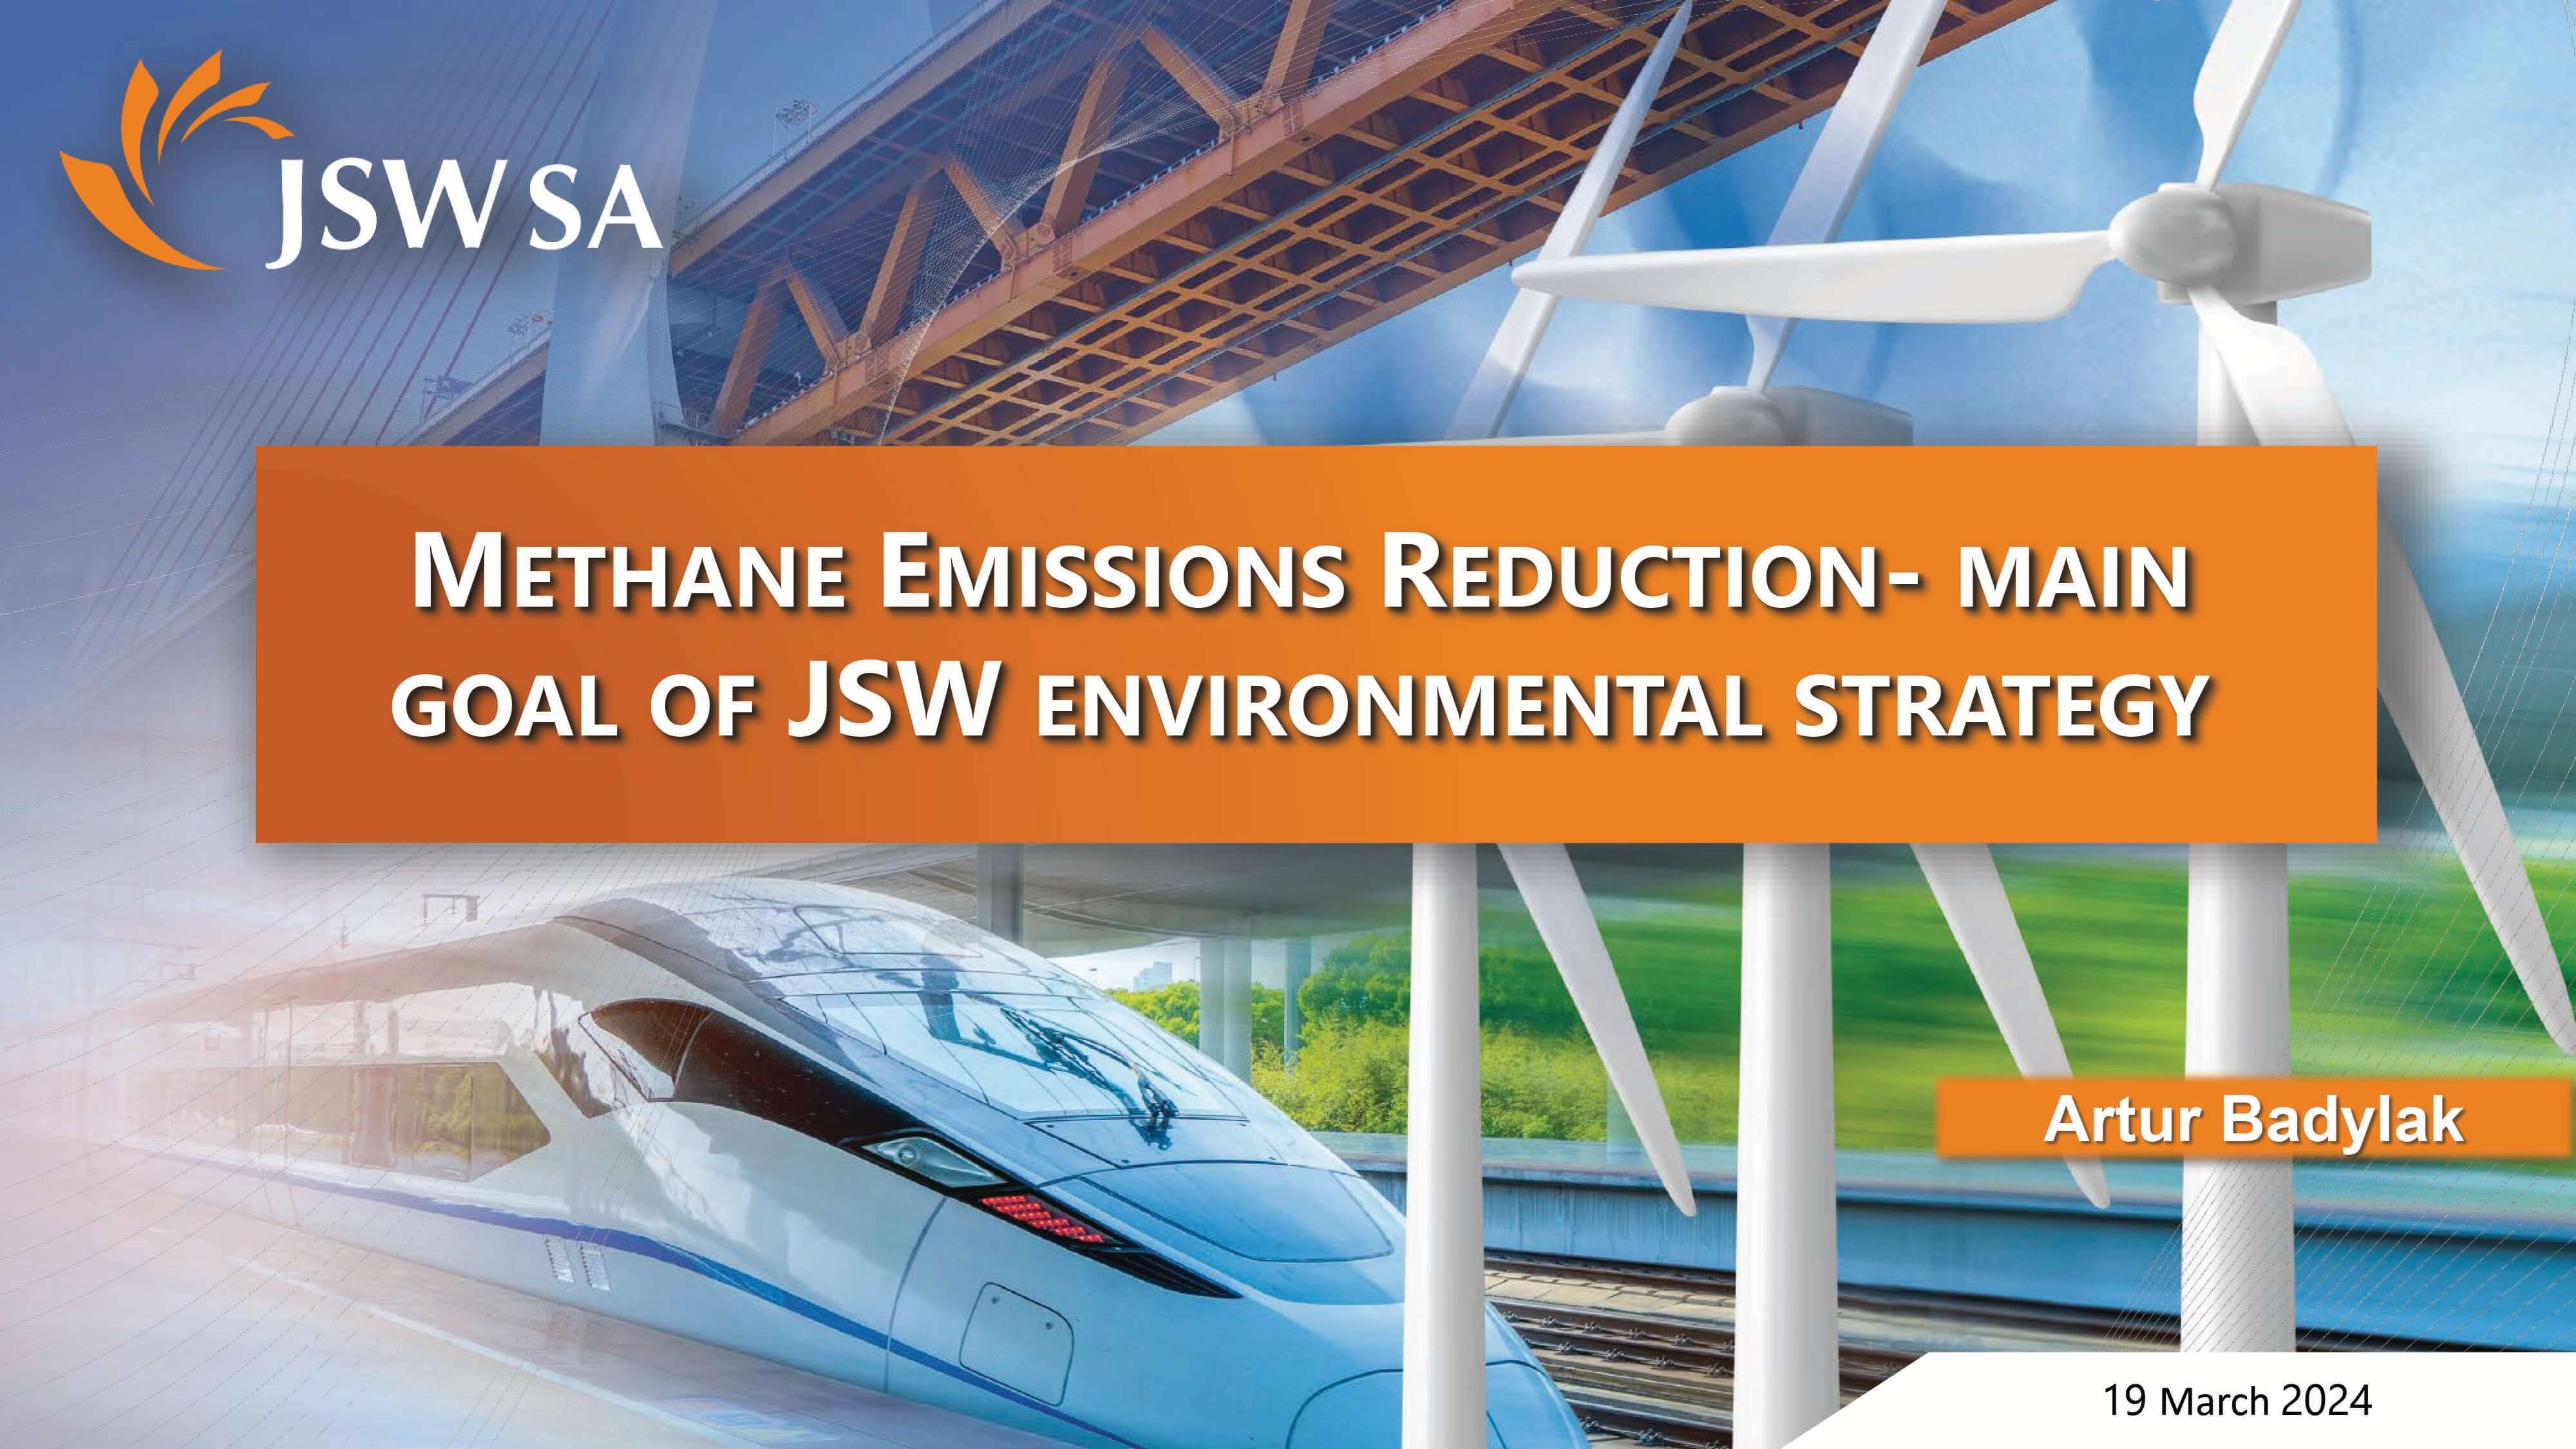 Methane Emissions Reduction - Main Goal of JSW Environmental Strategy
                                       